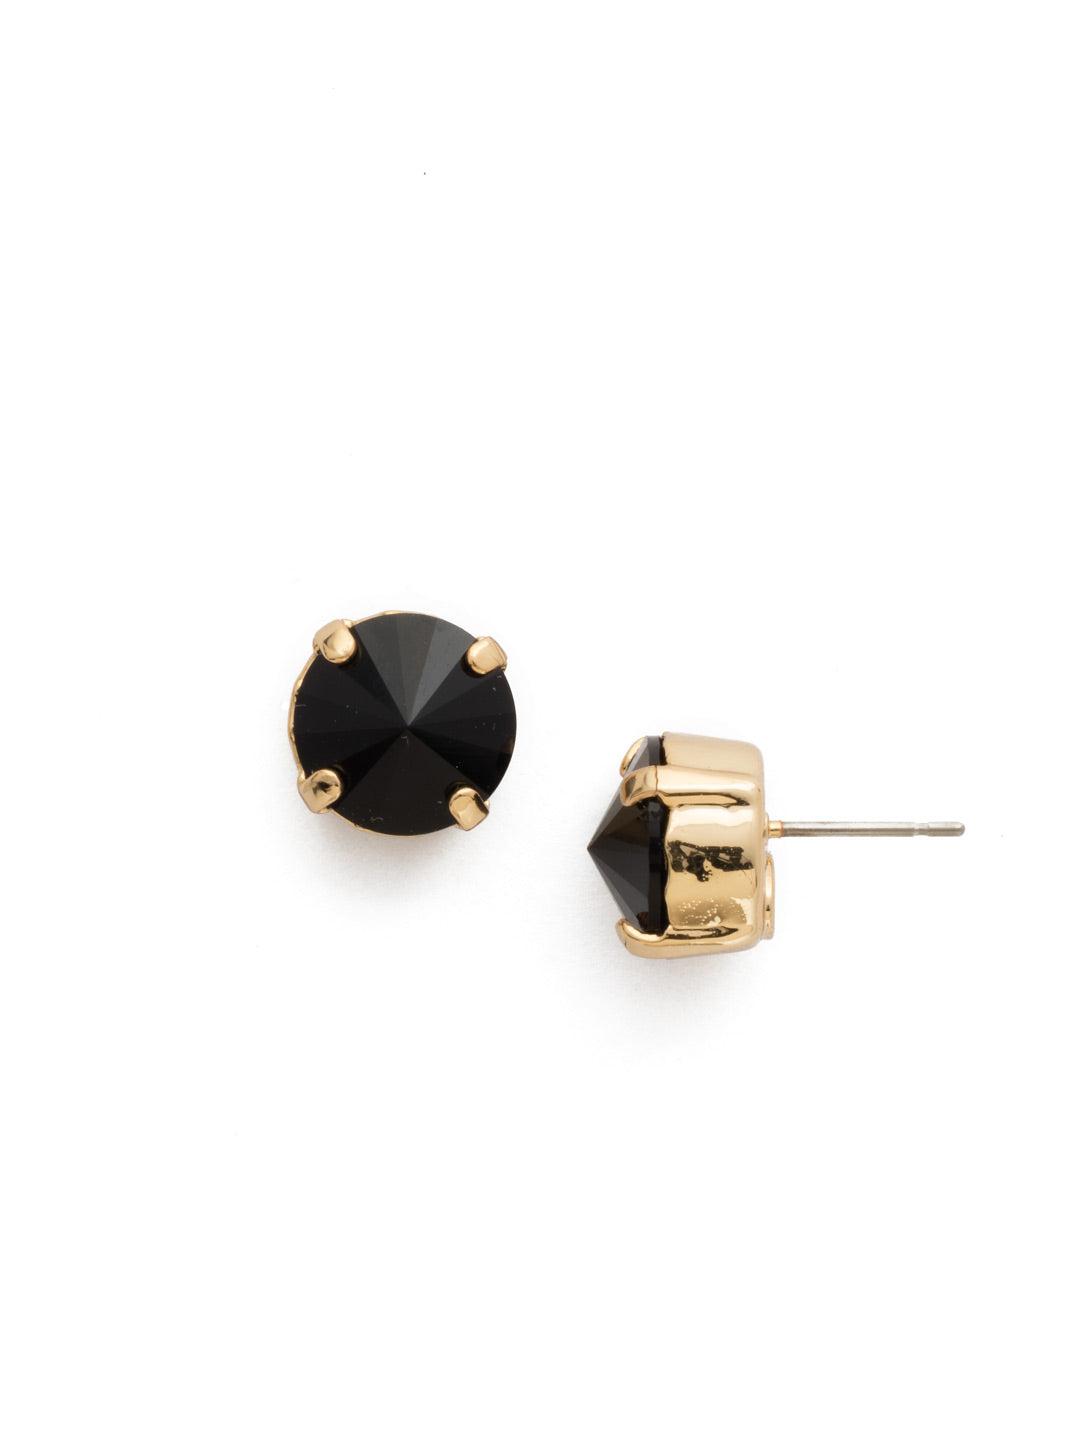 London Stud Earrings - ECM14BGJET - <p>Everyone needs a great pair of studs. Add some classic sparkle to any occasion with these stud earrings. Need help picking a stud? <a href="https://www.sorrelli.com/blogs/sisterhood/round-stud-earrings-101-a-rundown-of-sizes-styles-and-sparkle">Check out our size guide!</a> From Sorrelli's Jet collection in our Bright Gold-tone finish.</p>